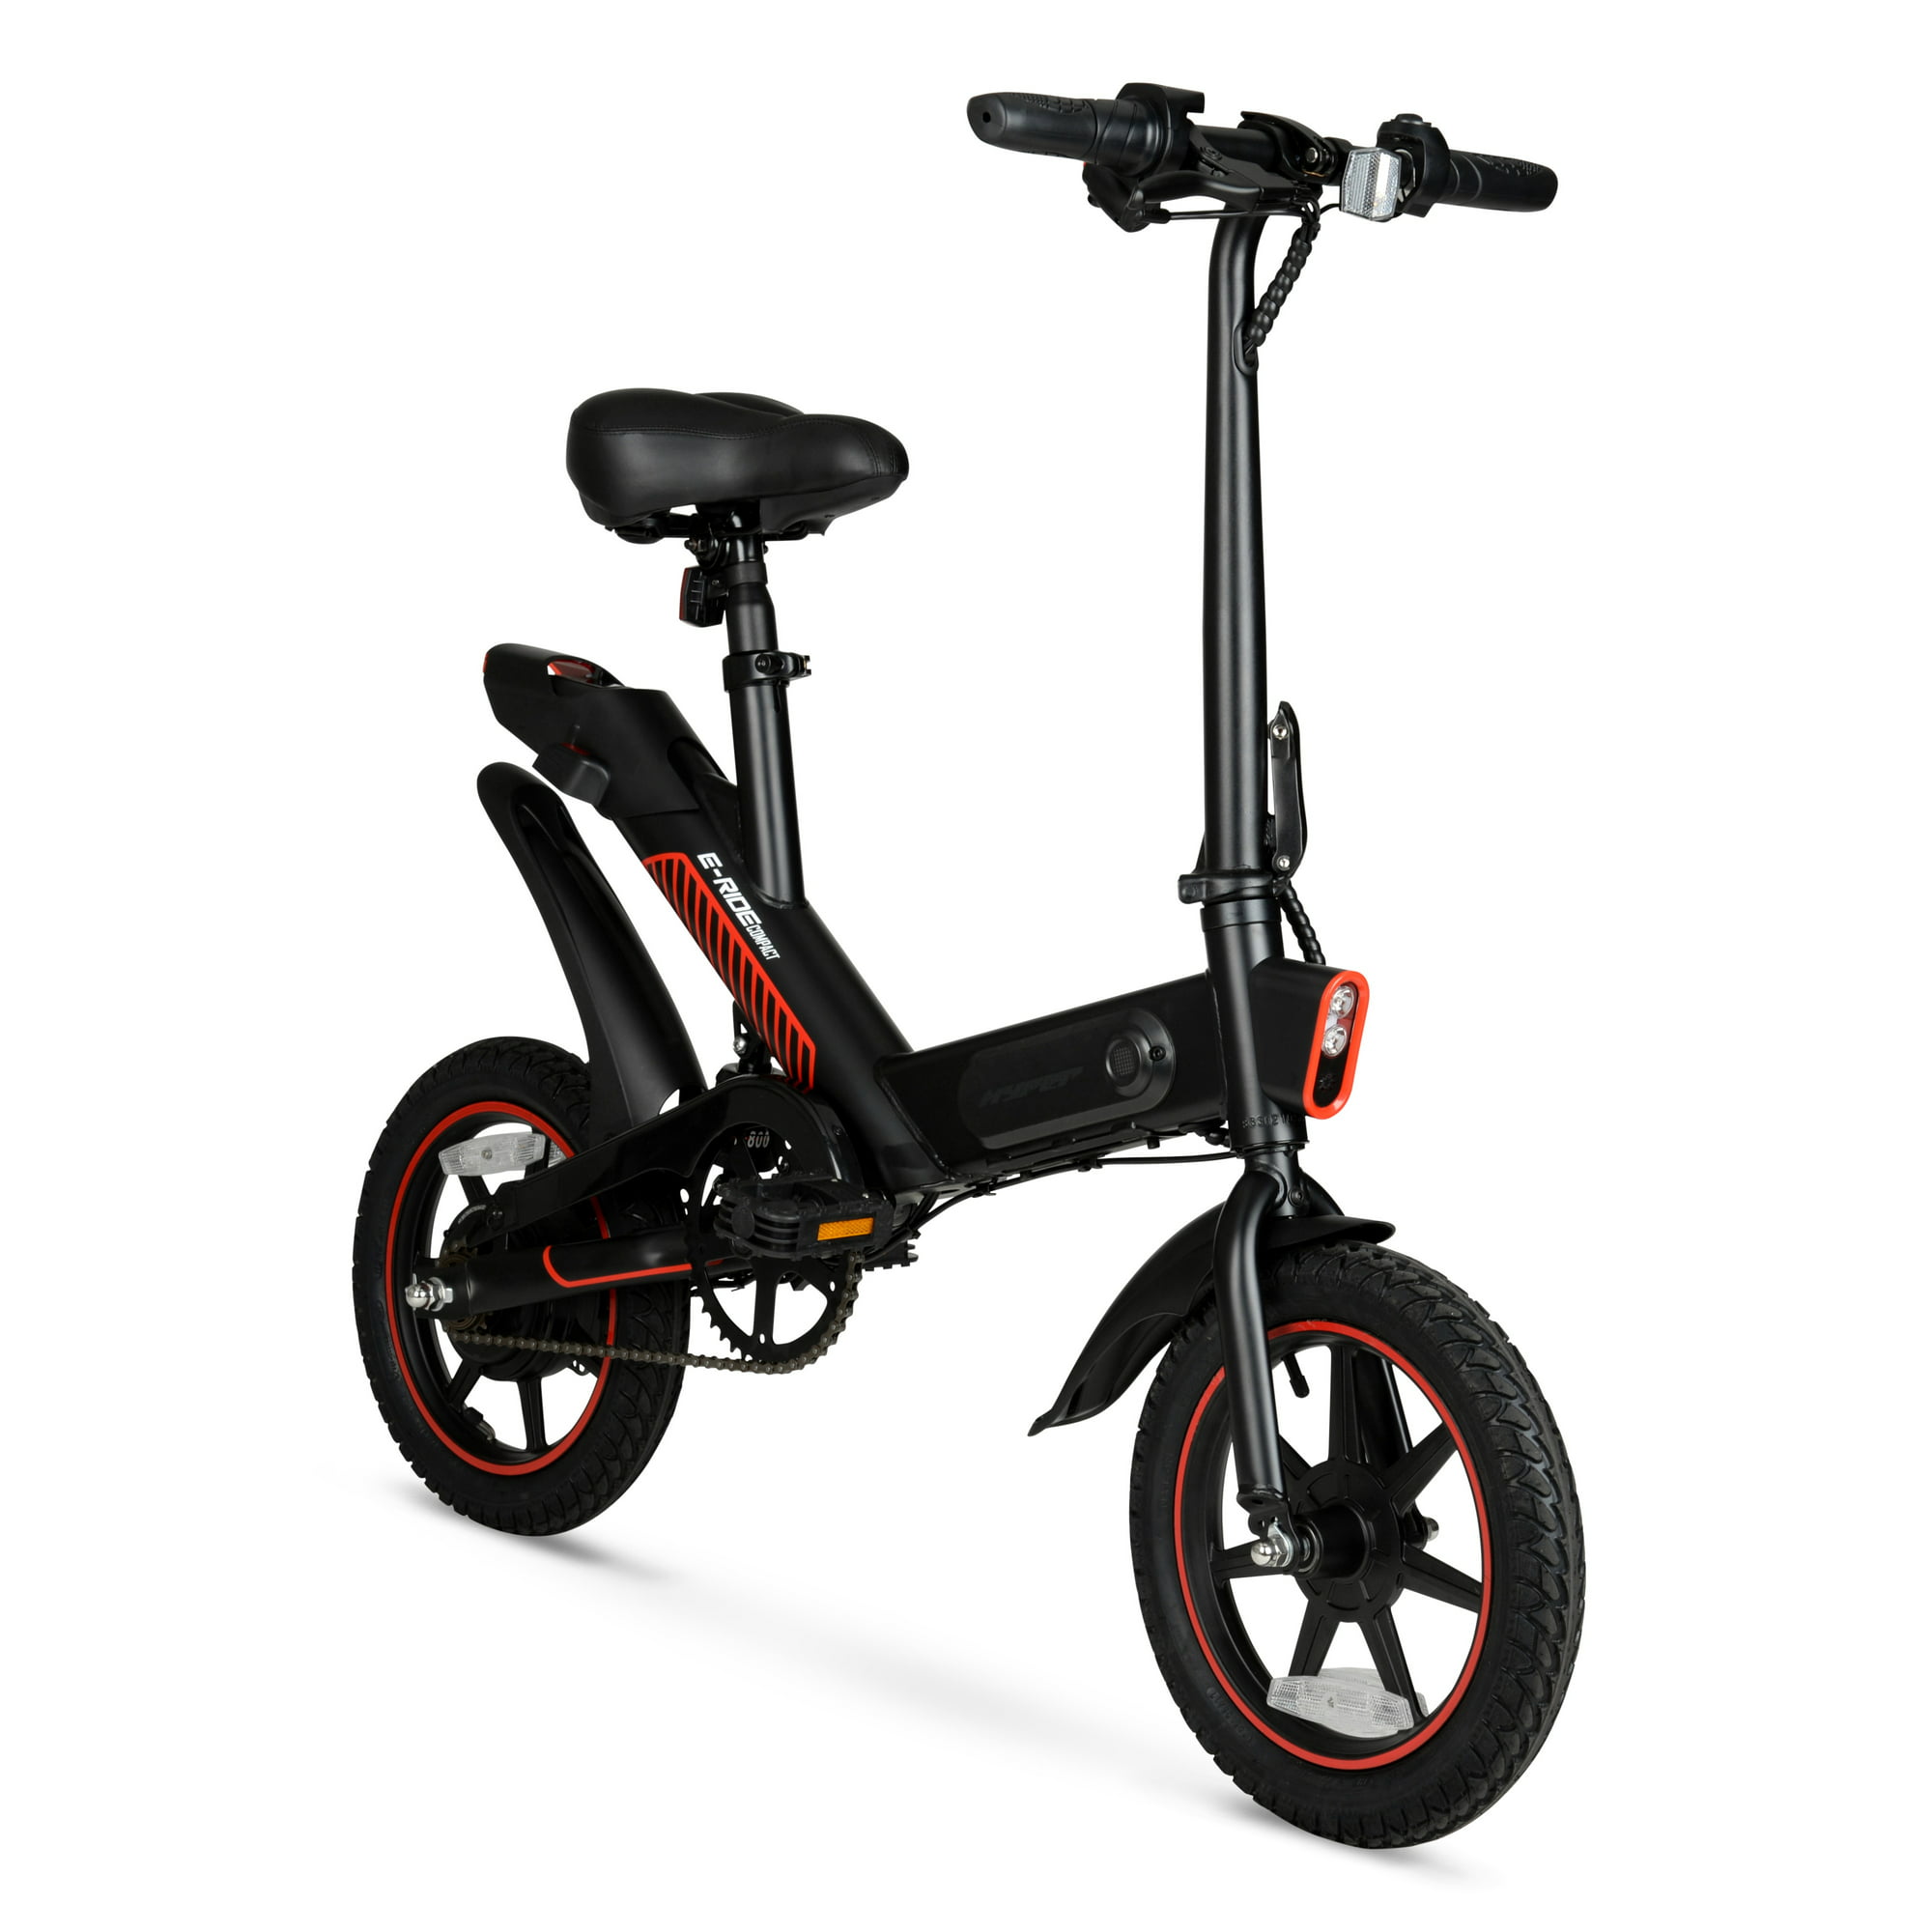 Hyper Bicycles 14″ 36V 350W Foldable Compact Electric Bike with Throttle